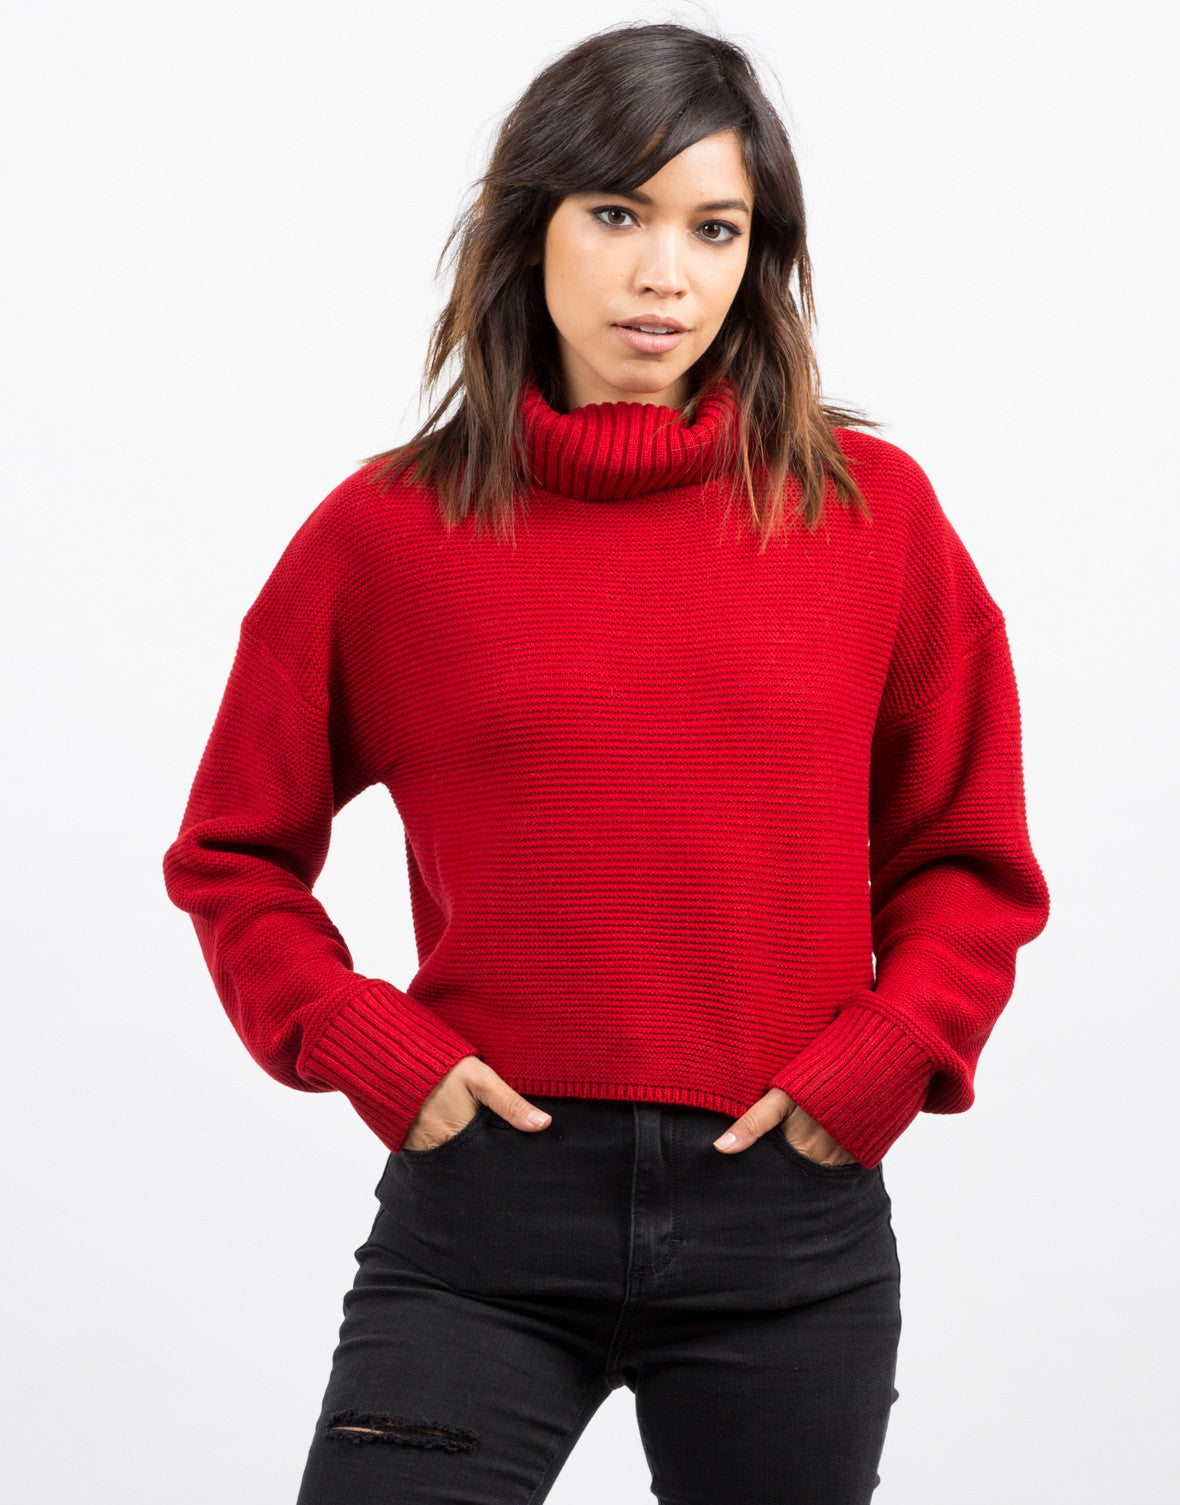  Oversized  Crop Turtleneck Sweater  Red Top Knit Sweater  